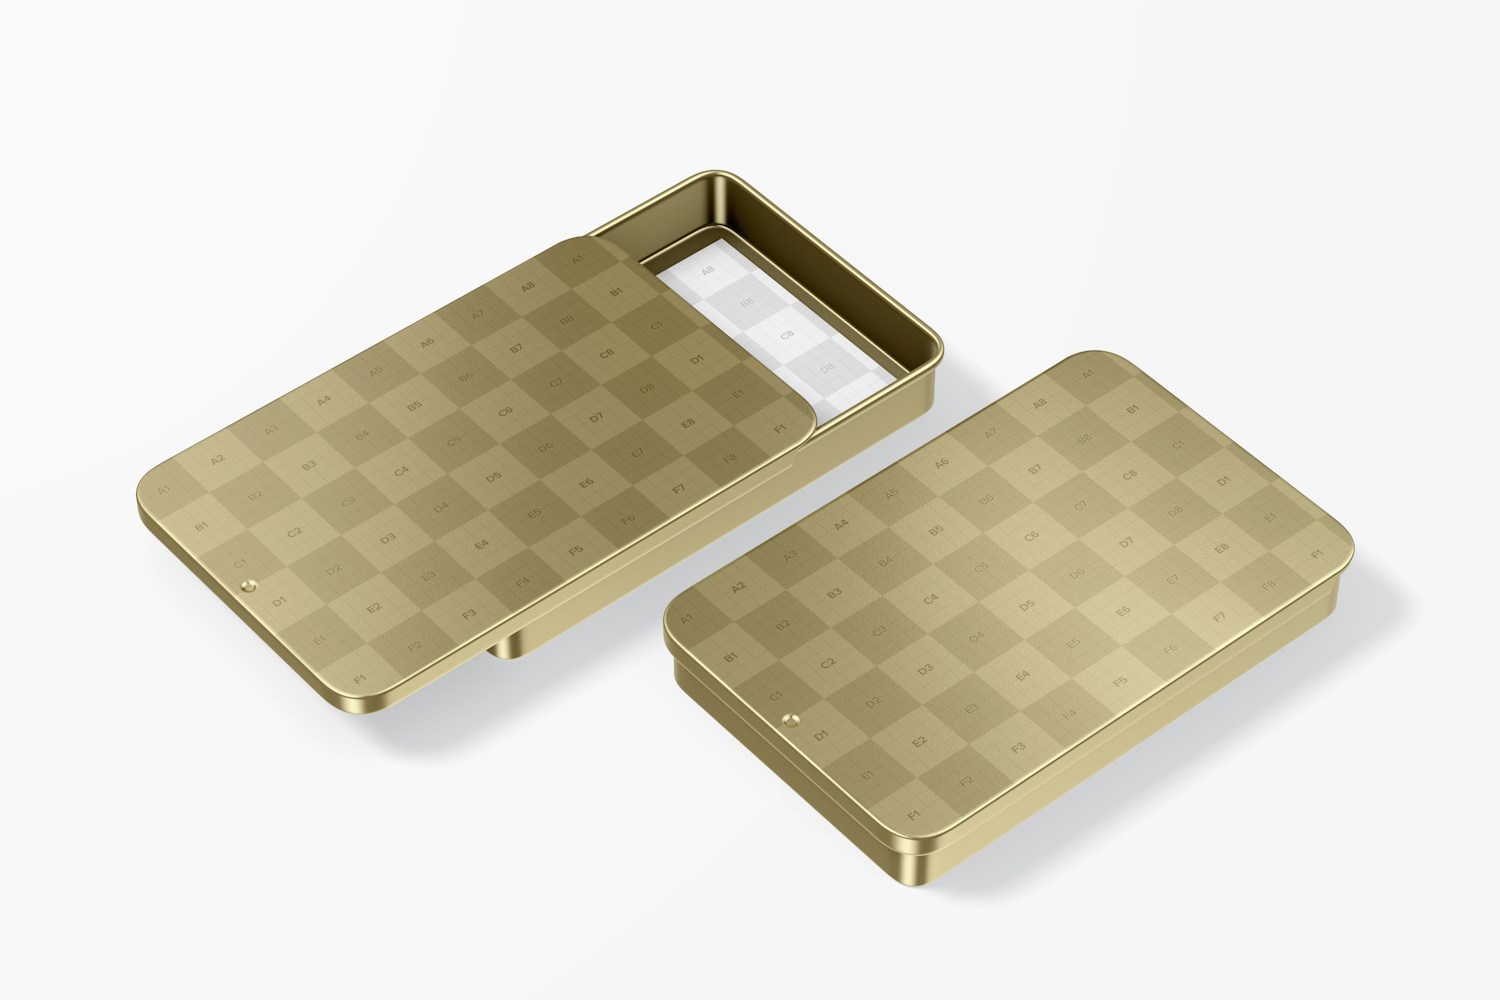 Metal Business Card Case Mockup, Opened and Closed